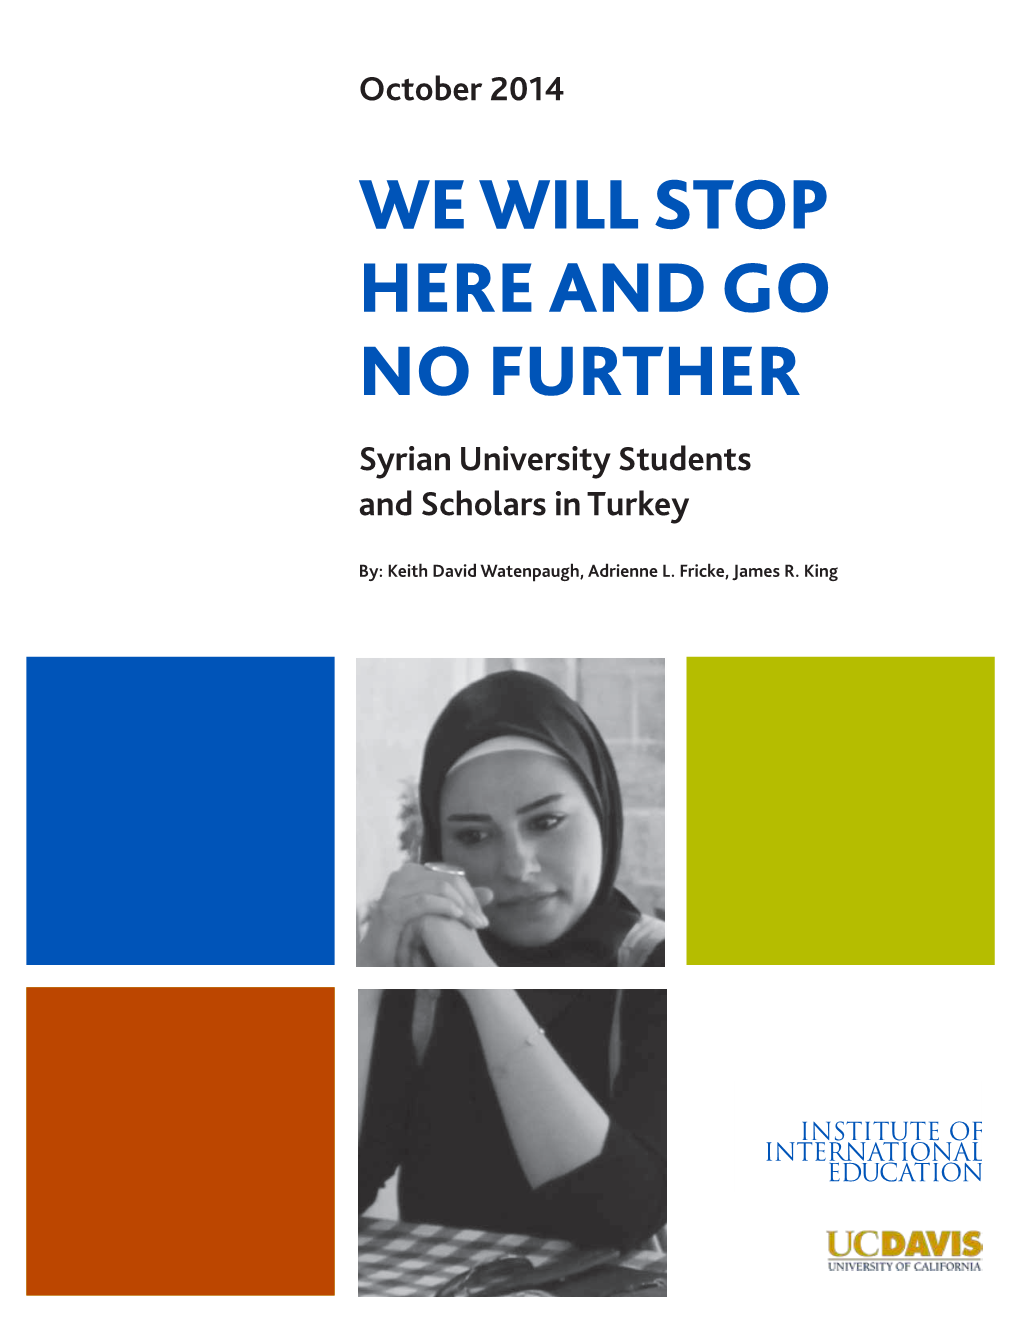 We Will Stop Here and Go No Further: Syrian University Students and Scholars in Turkey | IIE | UCD-HRI